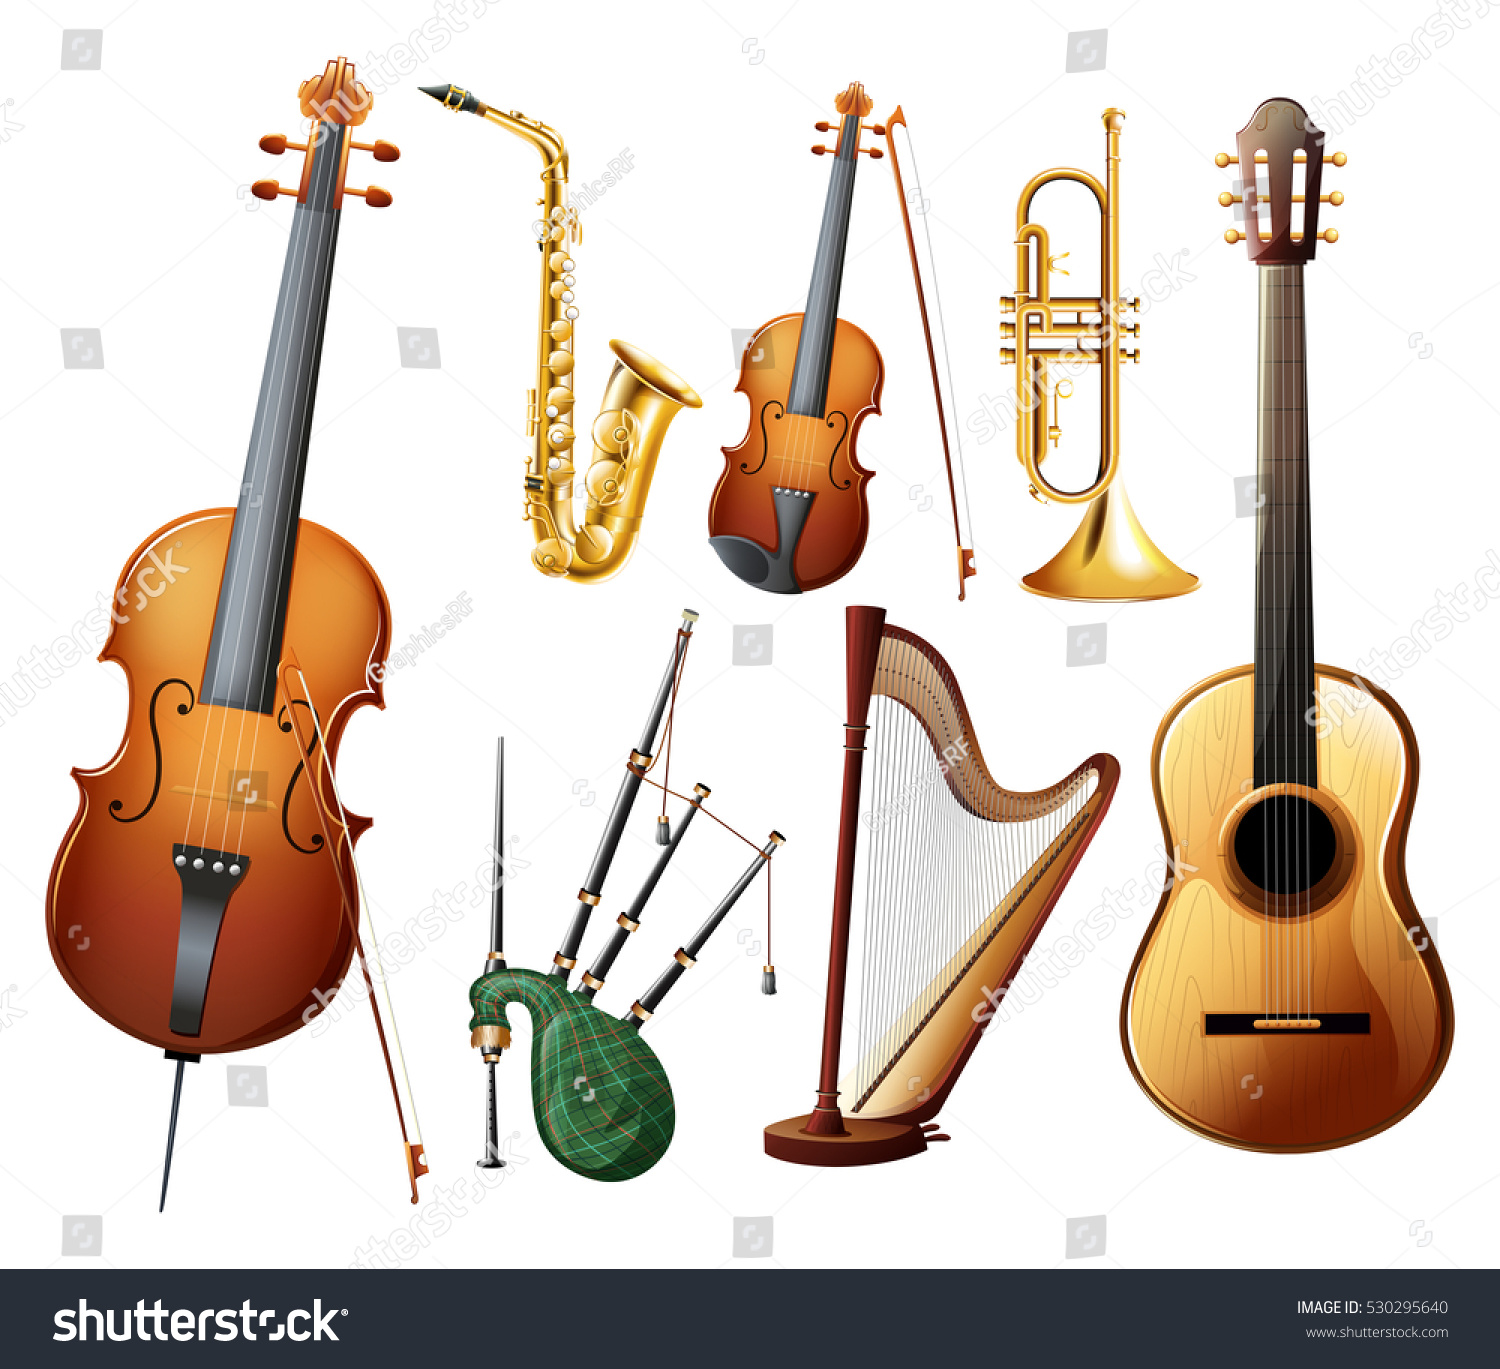 Different Types Musical Instruments Illustration Stock Vector (Royalty ...